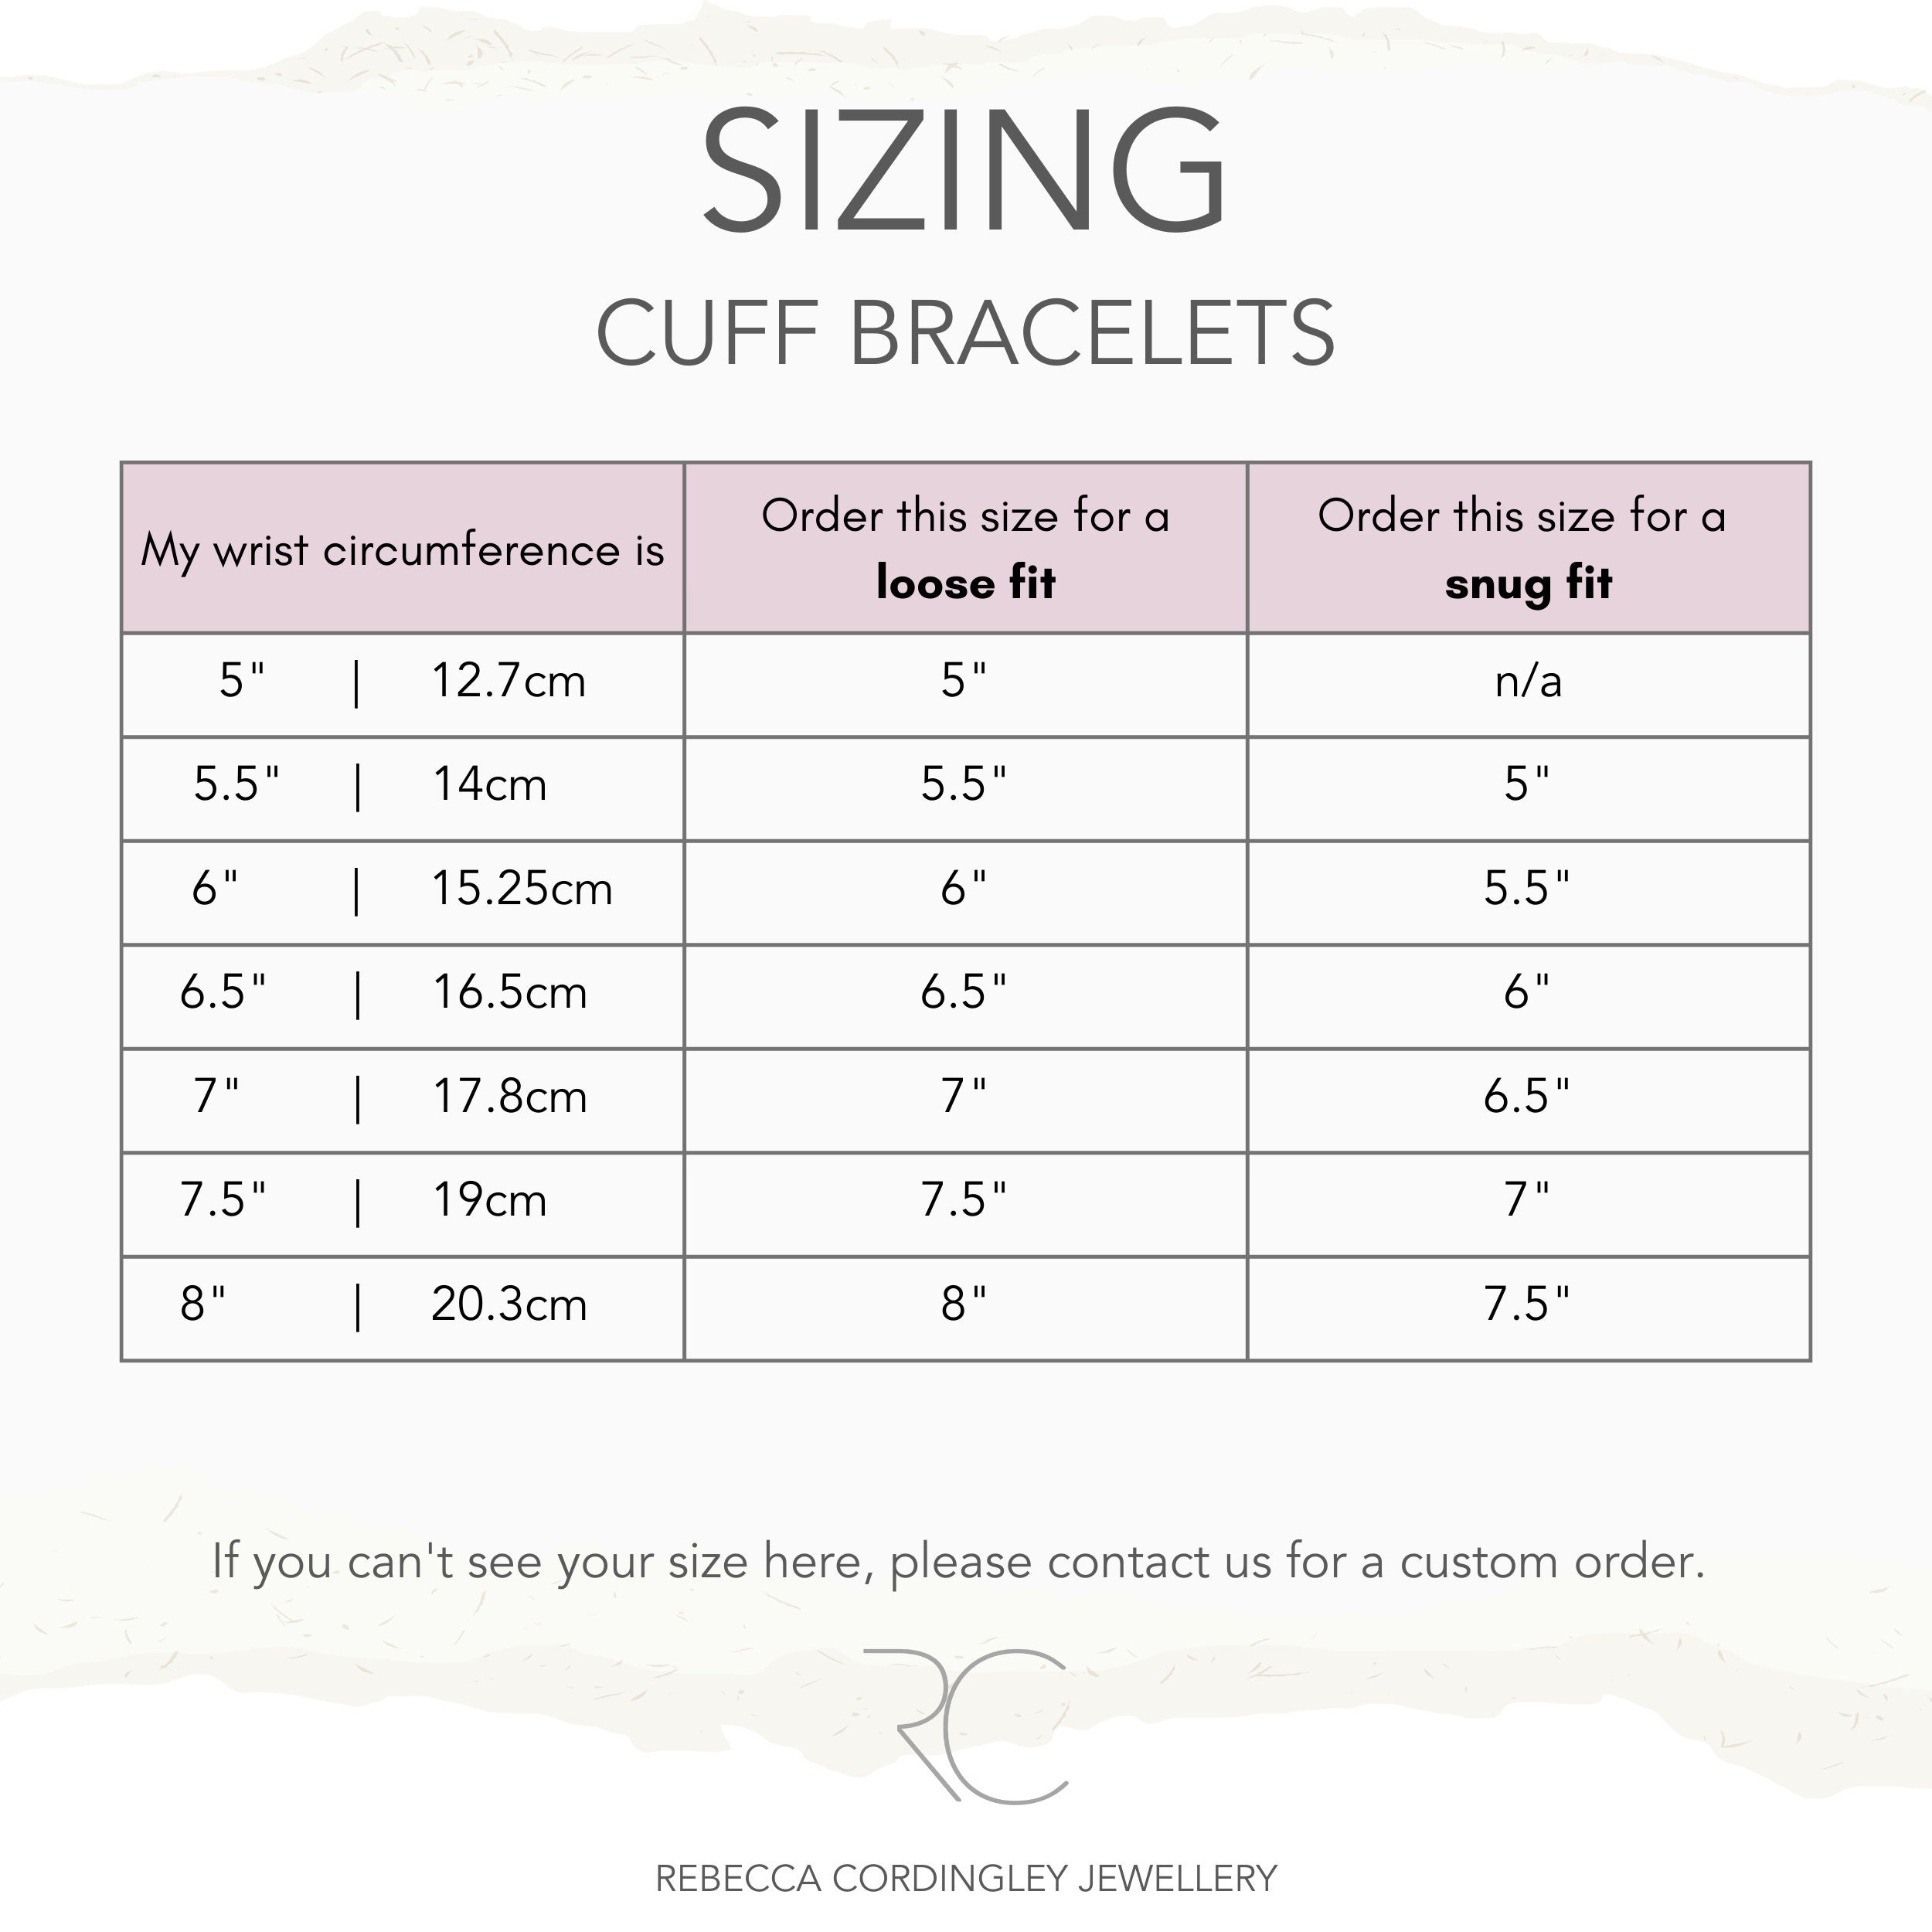 Size guide - How to choose your size band